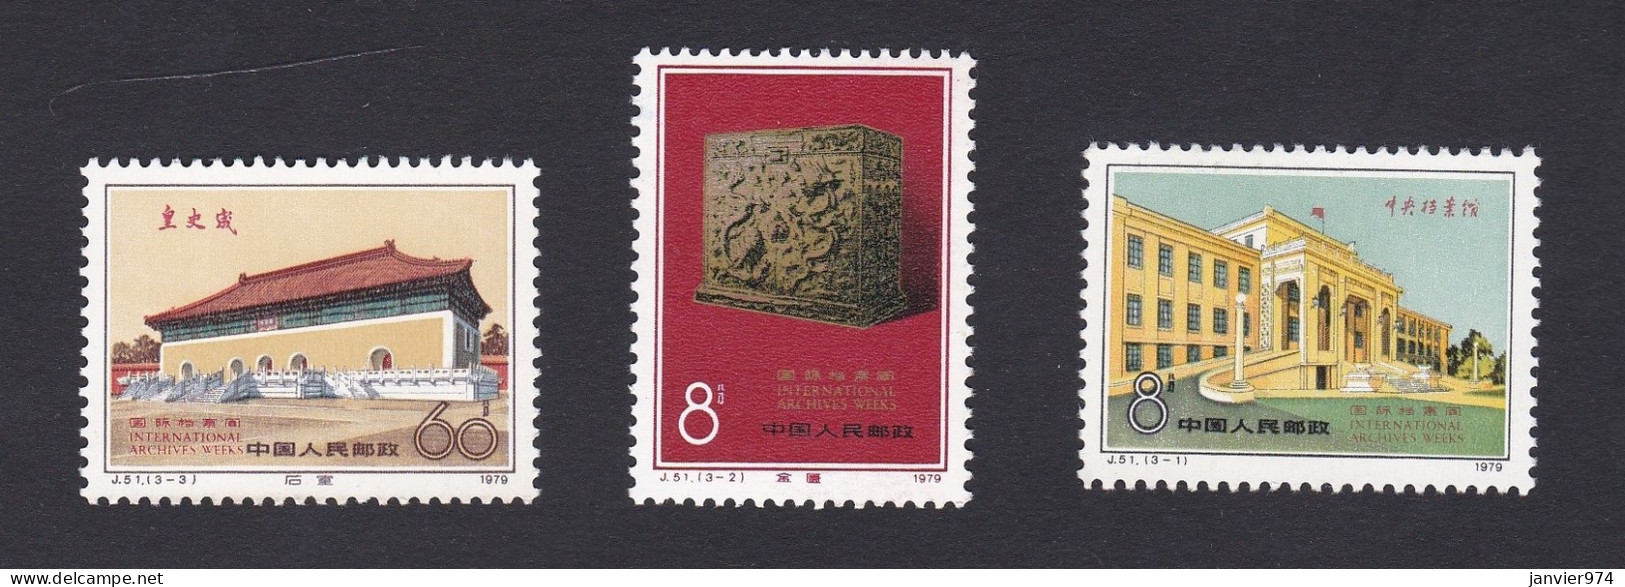 Chine 1979. Semaines Internationales Des Archives, La Serie Complète , 3 Timbres Neufs , Scan Recto Verso . - Ungebraucht